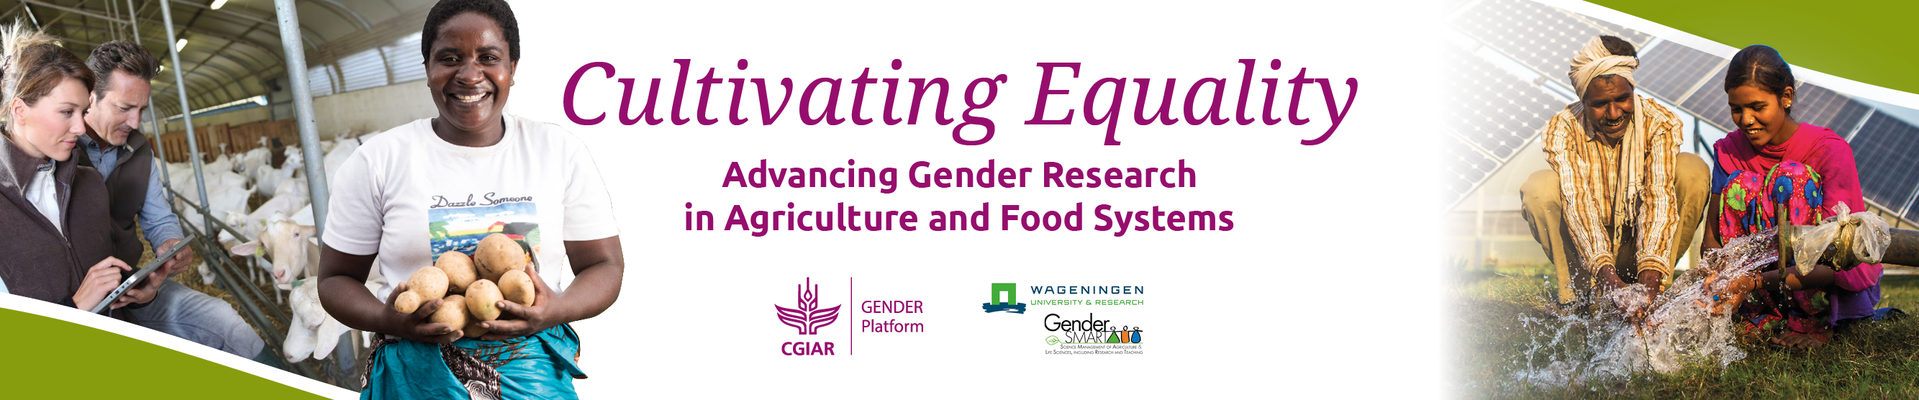 Cultivating Equality: Advancing gender research in agriculture and food systems